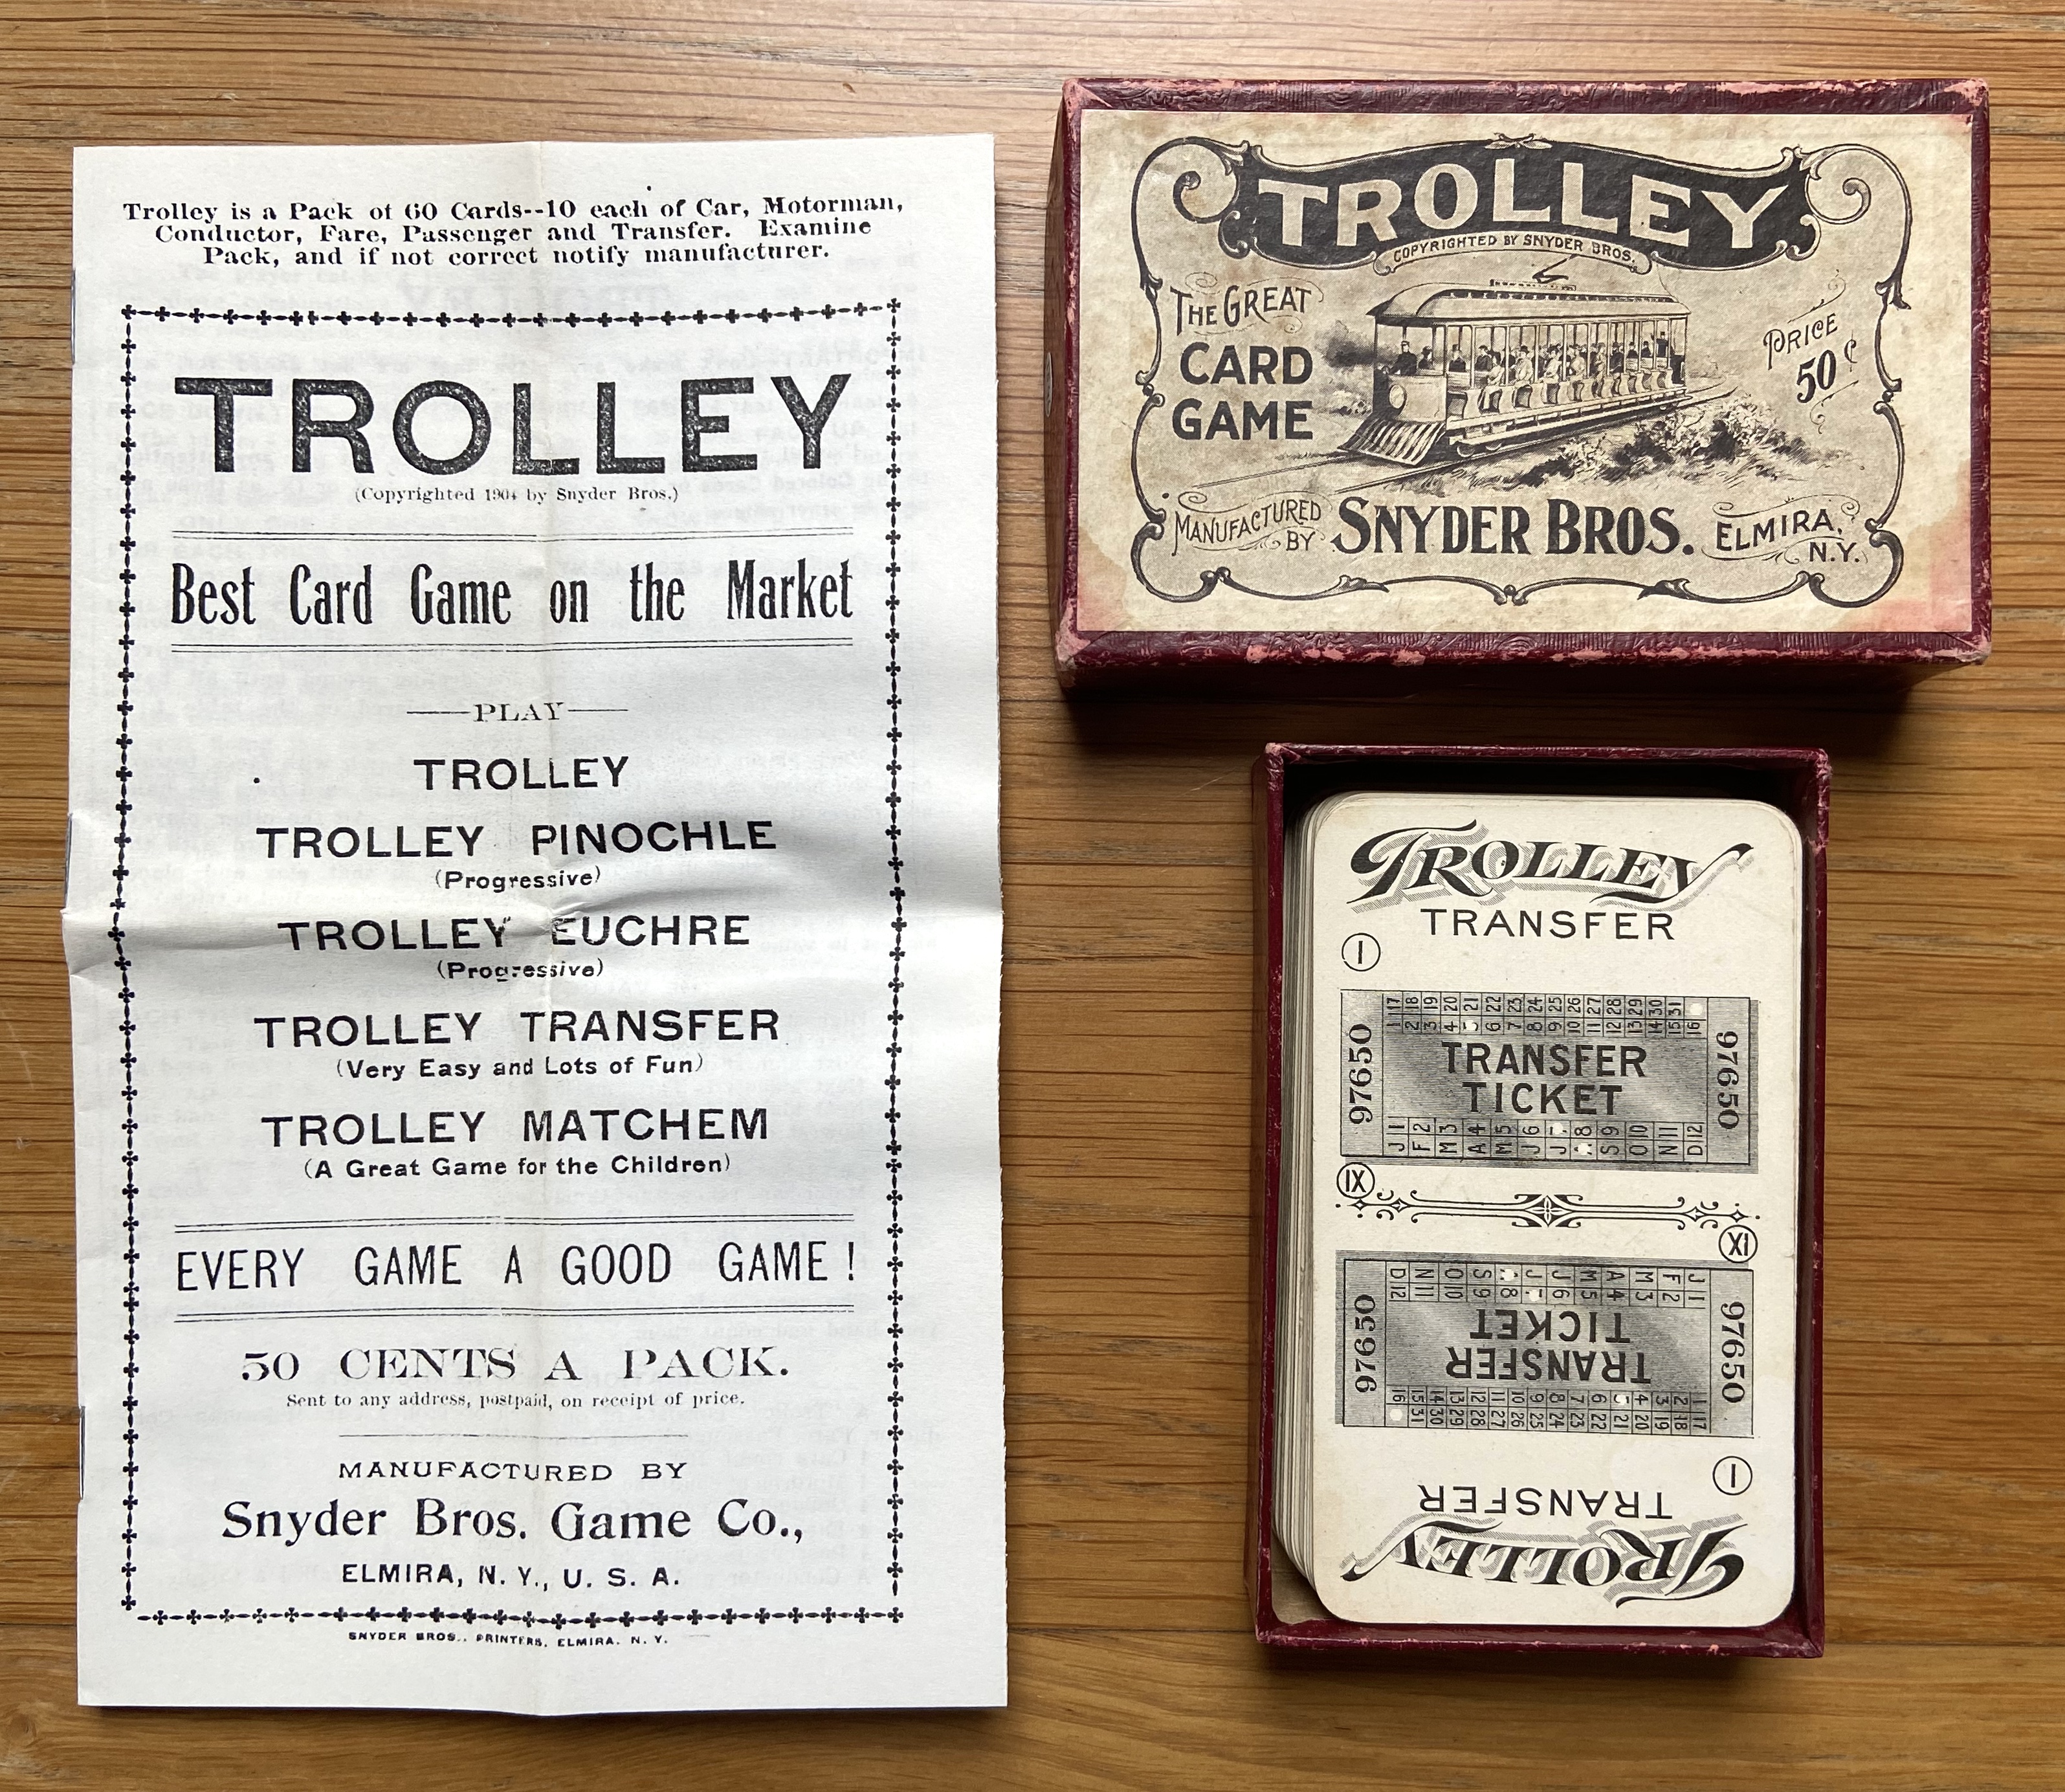 Trolley: The Great Card Game (aka Trains: The Great Card Game)